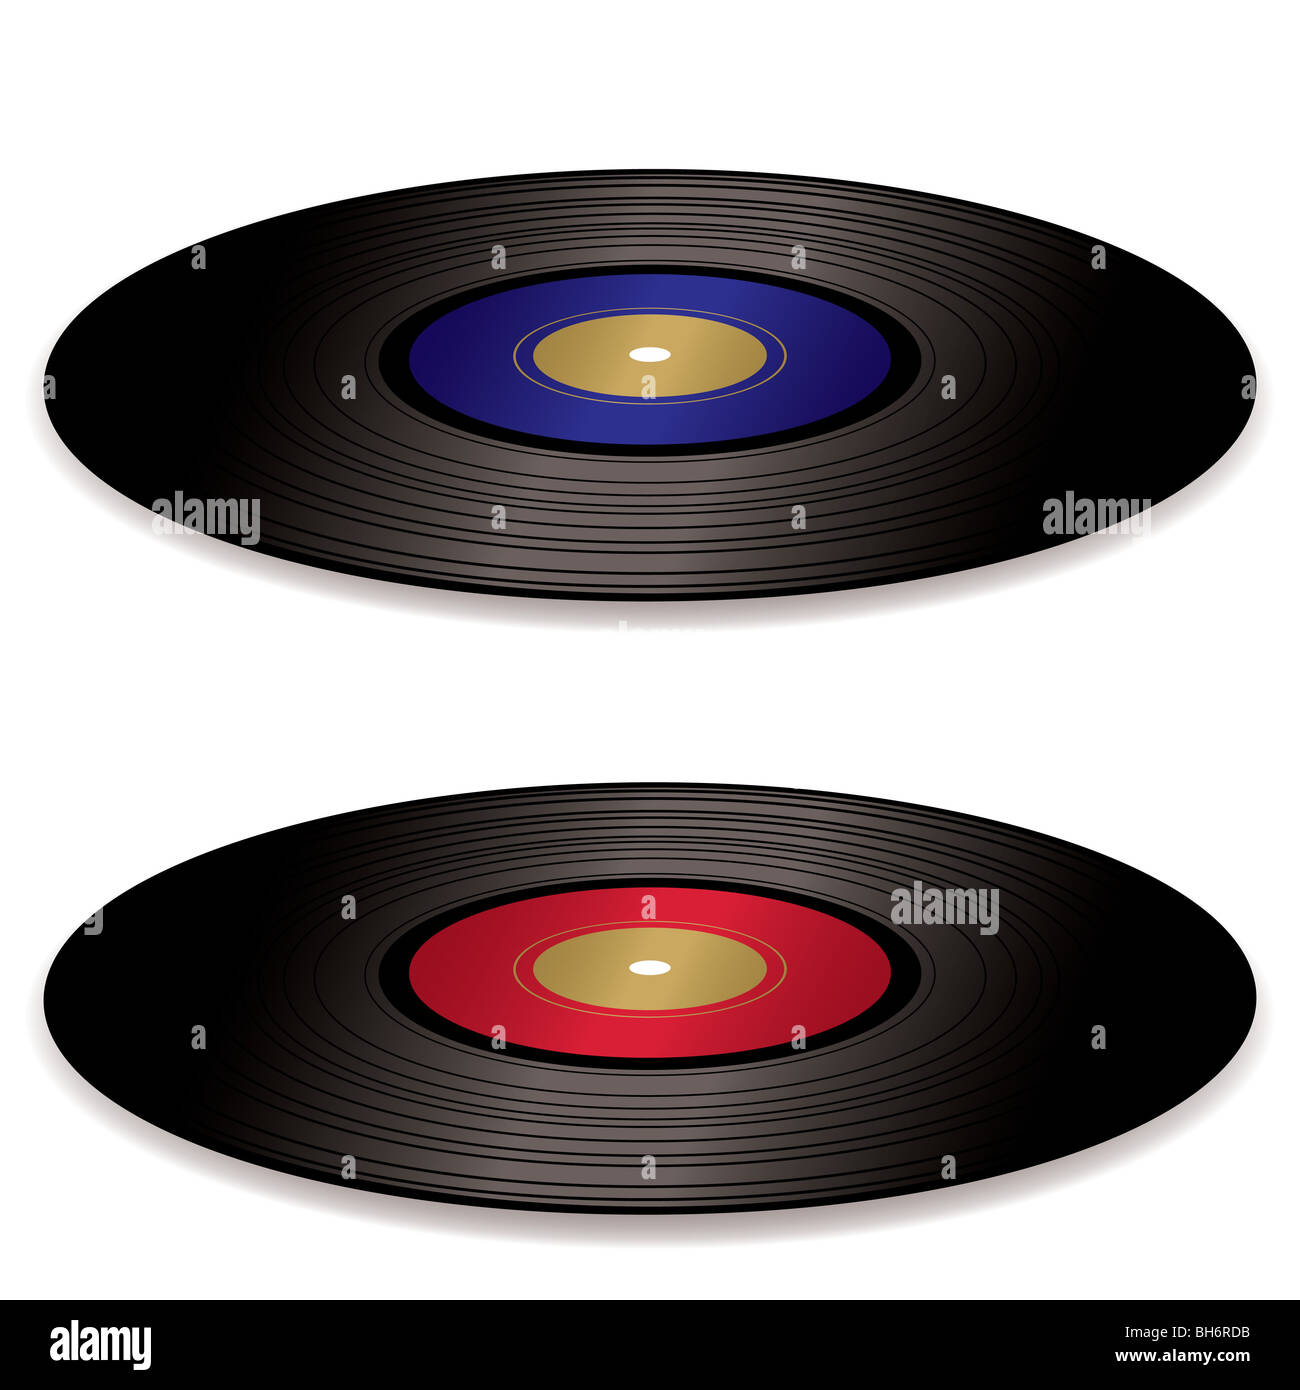 pair of old fashioned vinyl record albums with blue and red labels